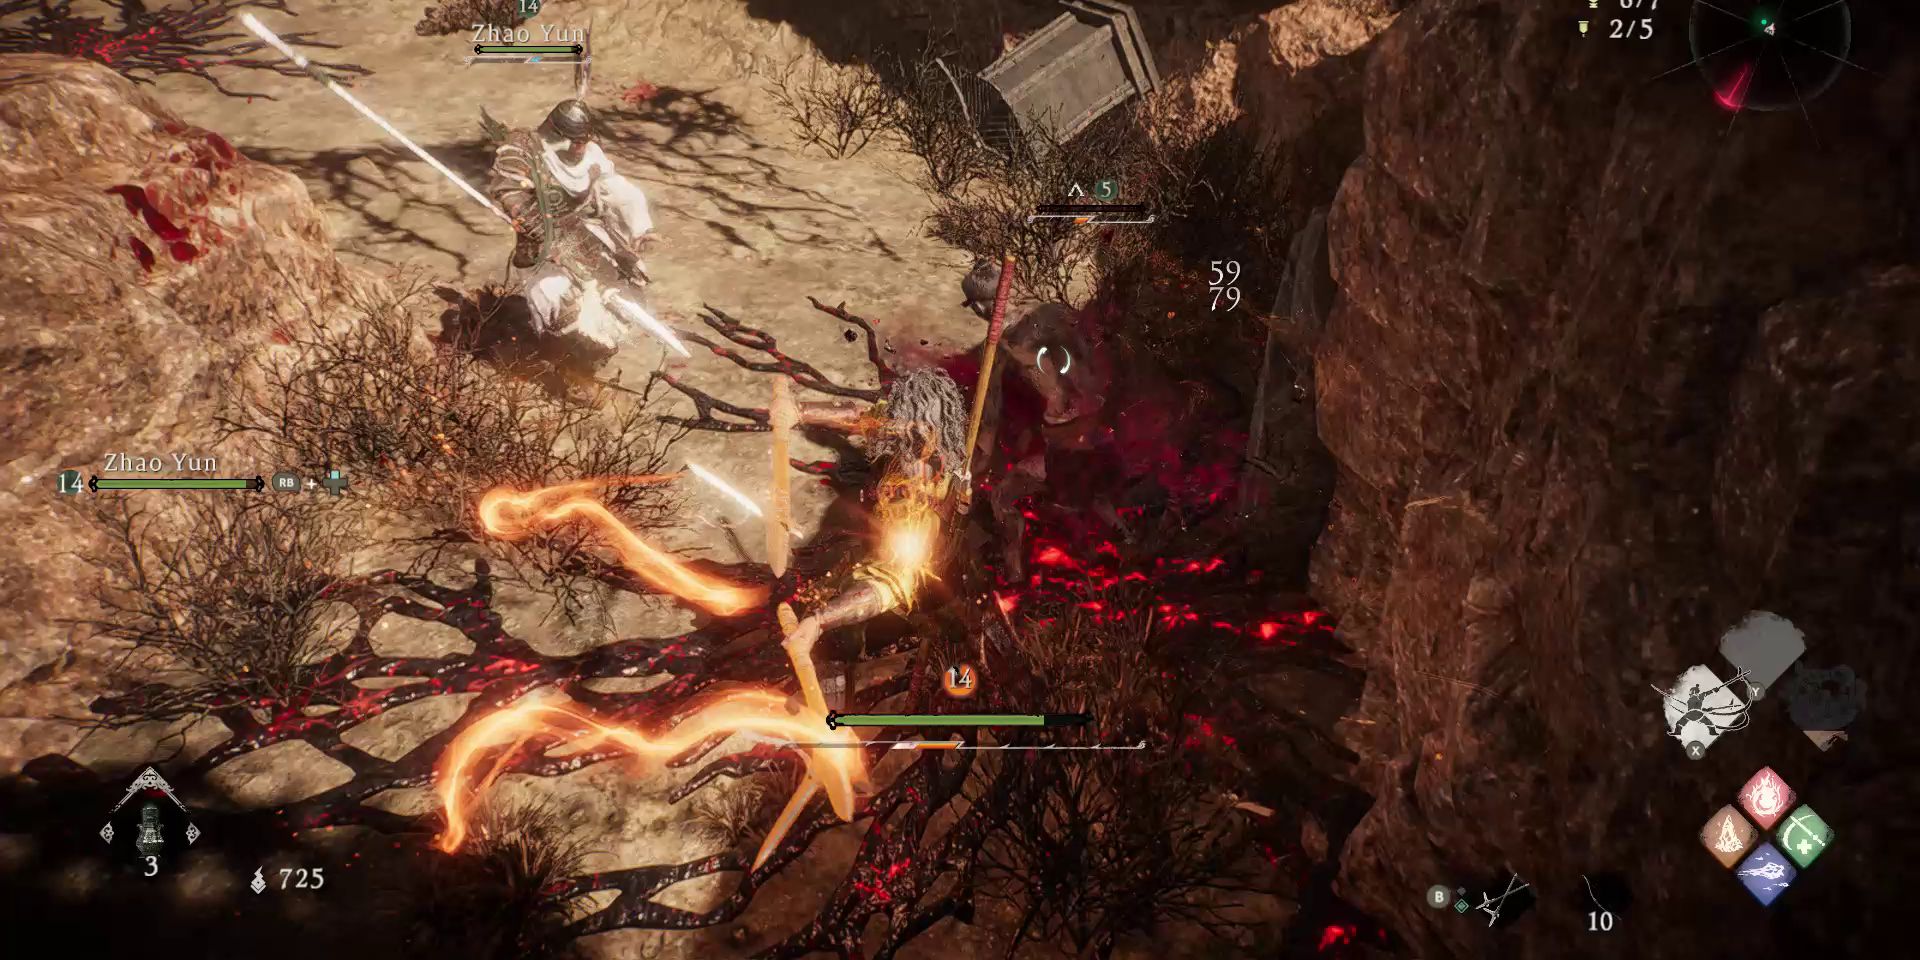 The player character unleashes a special move with the Dual Marquis Halberds in Wo Long: Fallen Dynasty.